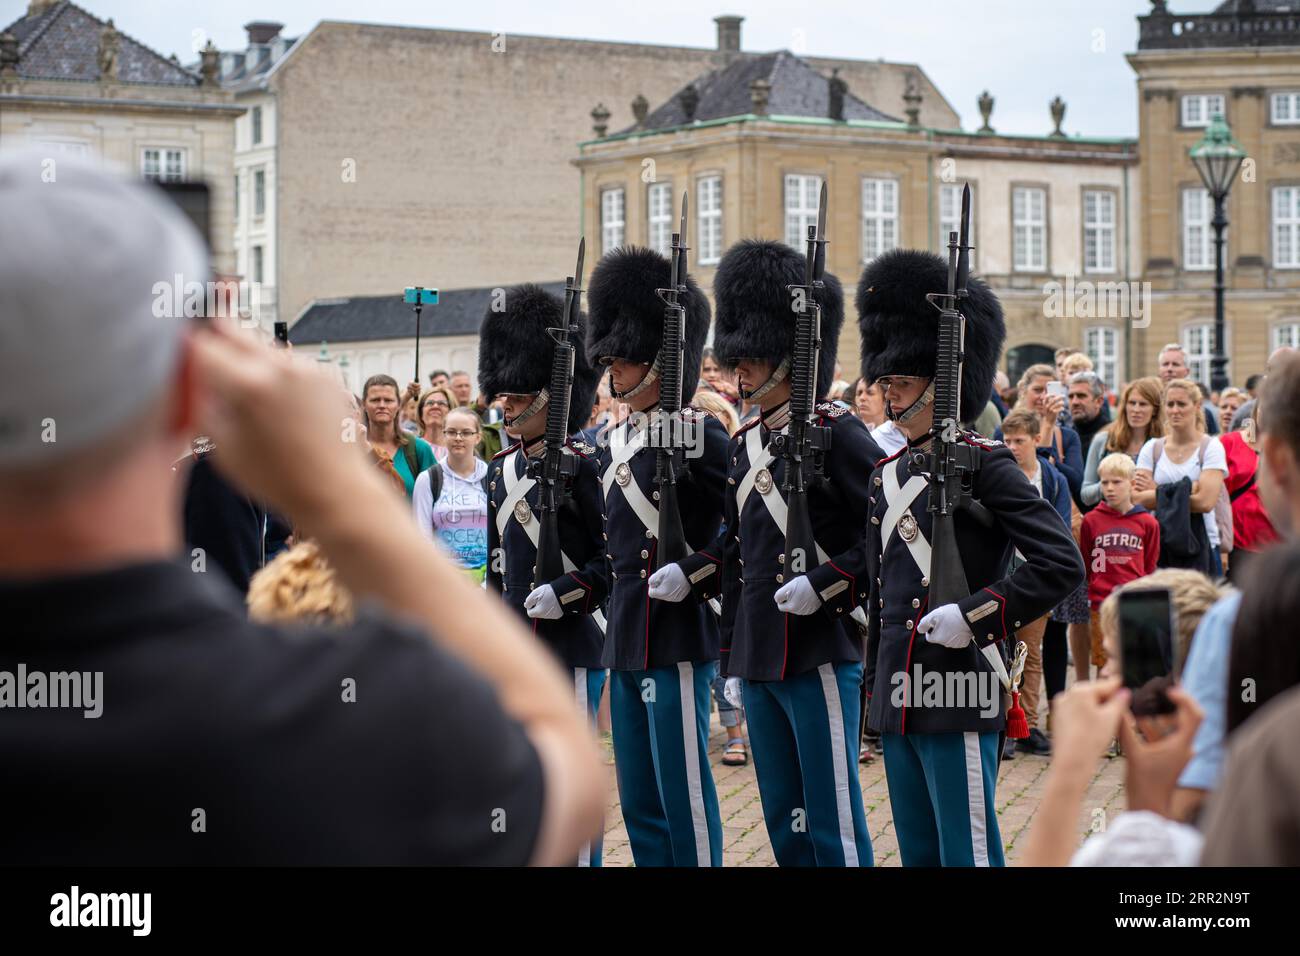 Copenhagen, Denmark, July 18, 2022: People watching group of Danish Royal Guards at Amalienborg Palace for the change of guard ceremony Stock Photo